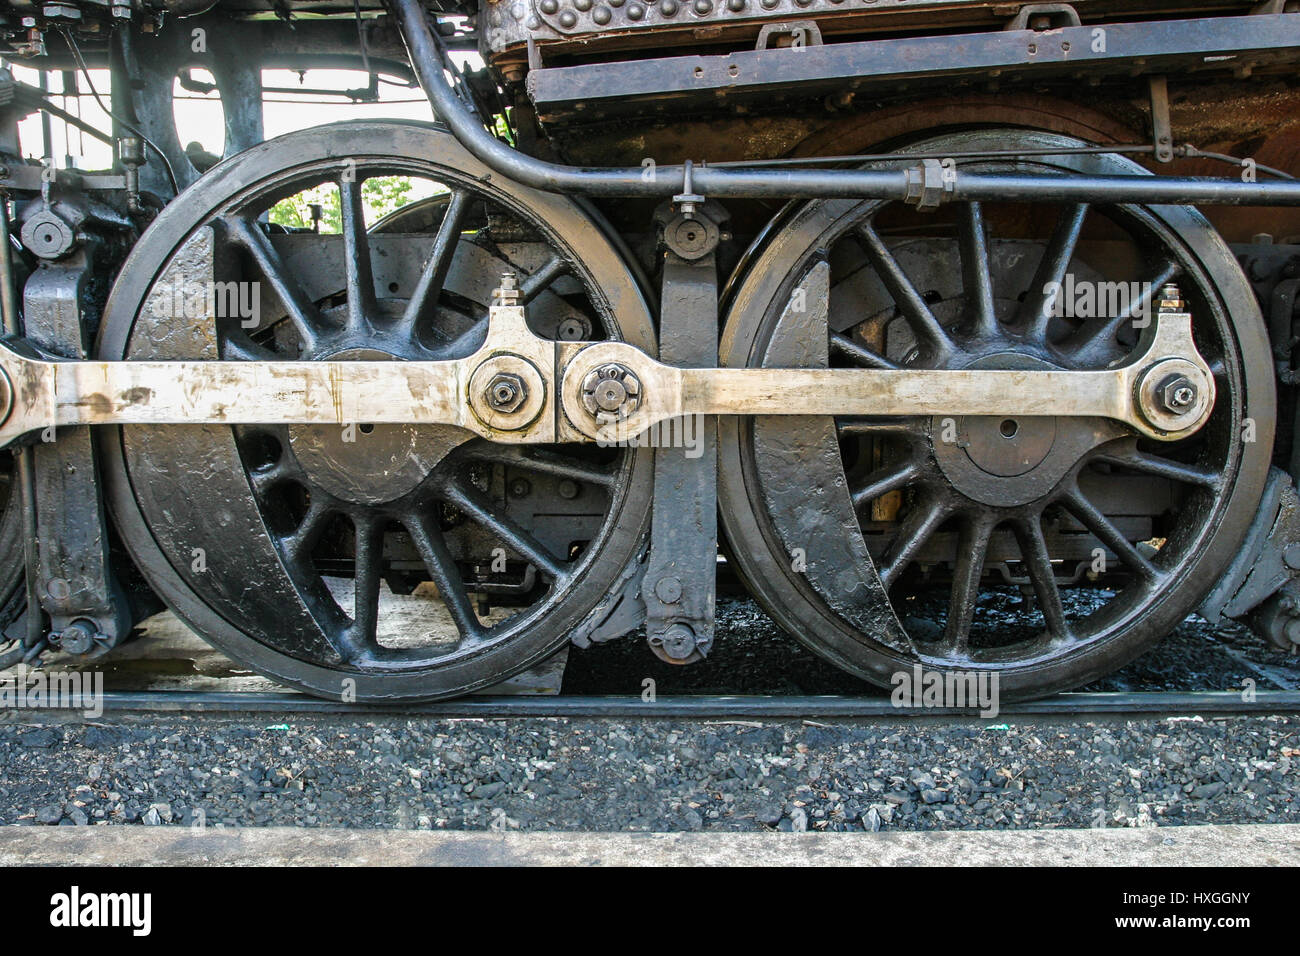 Close-up view of locomotive coupling rods. Stock Photo